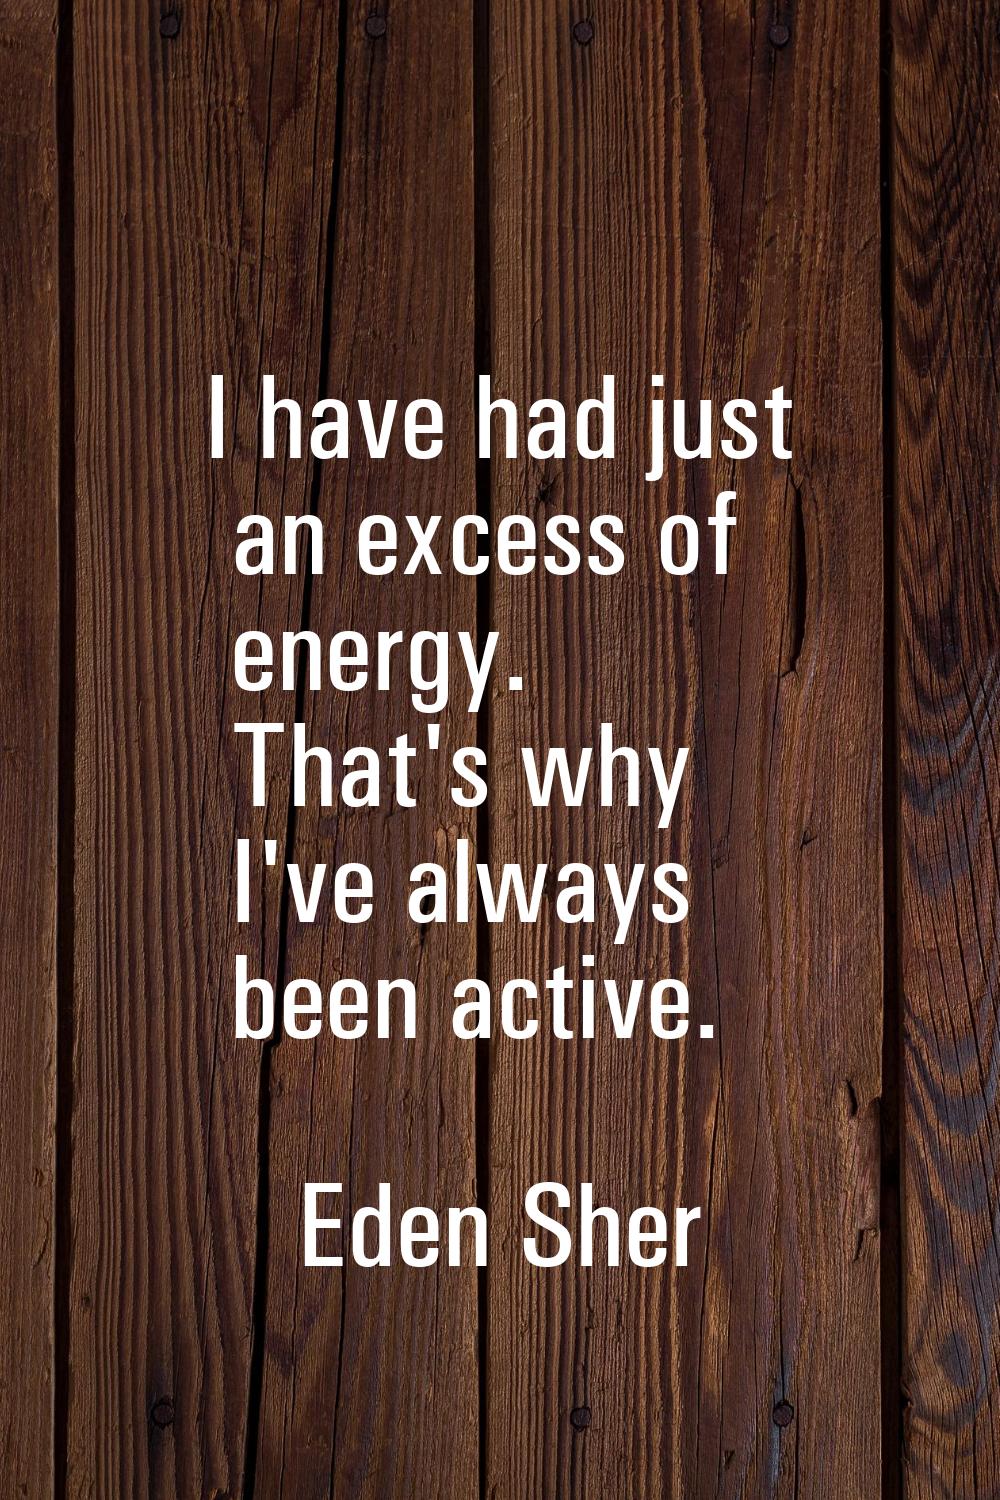 I have had just an excess of energy. That's why I've always been active.